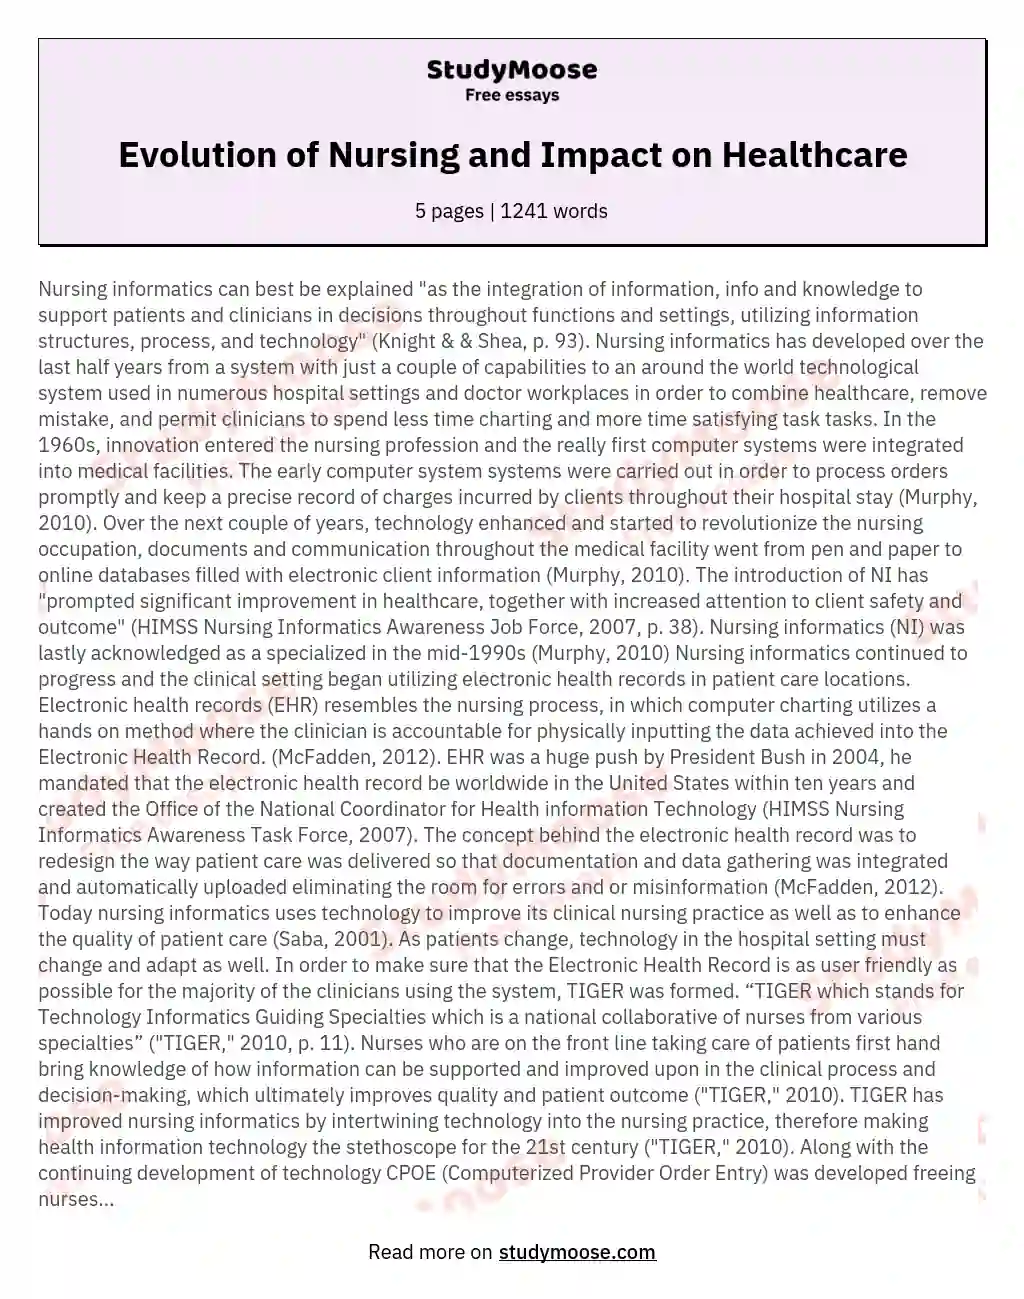 Evolution of Nursing and Impact on Healthcare essay